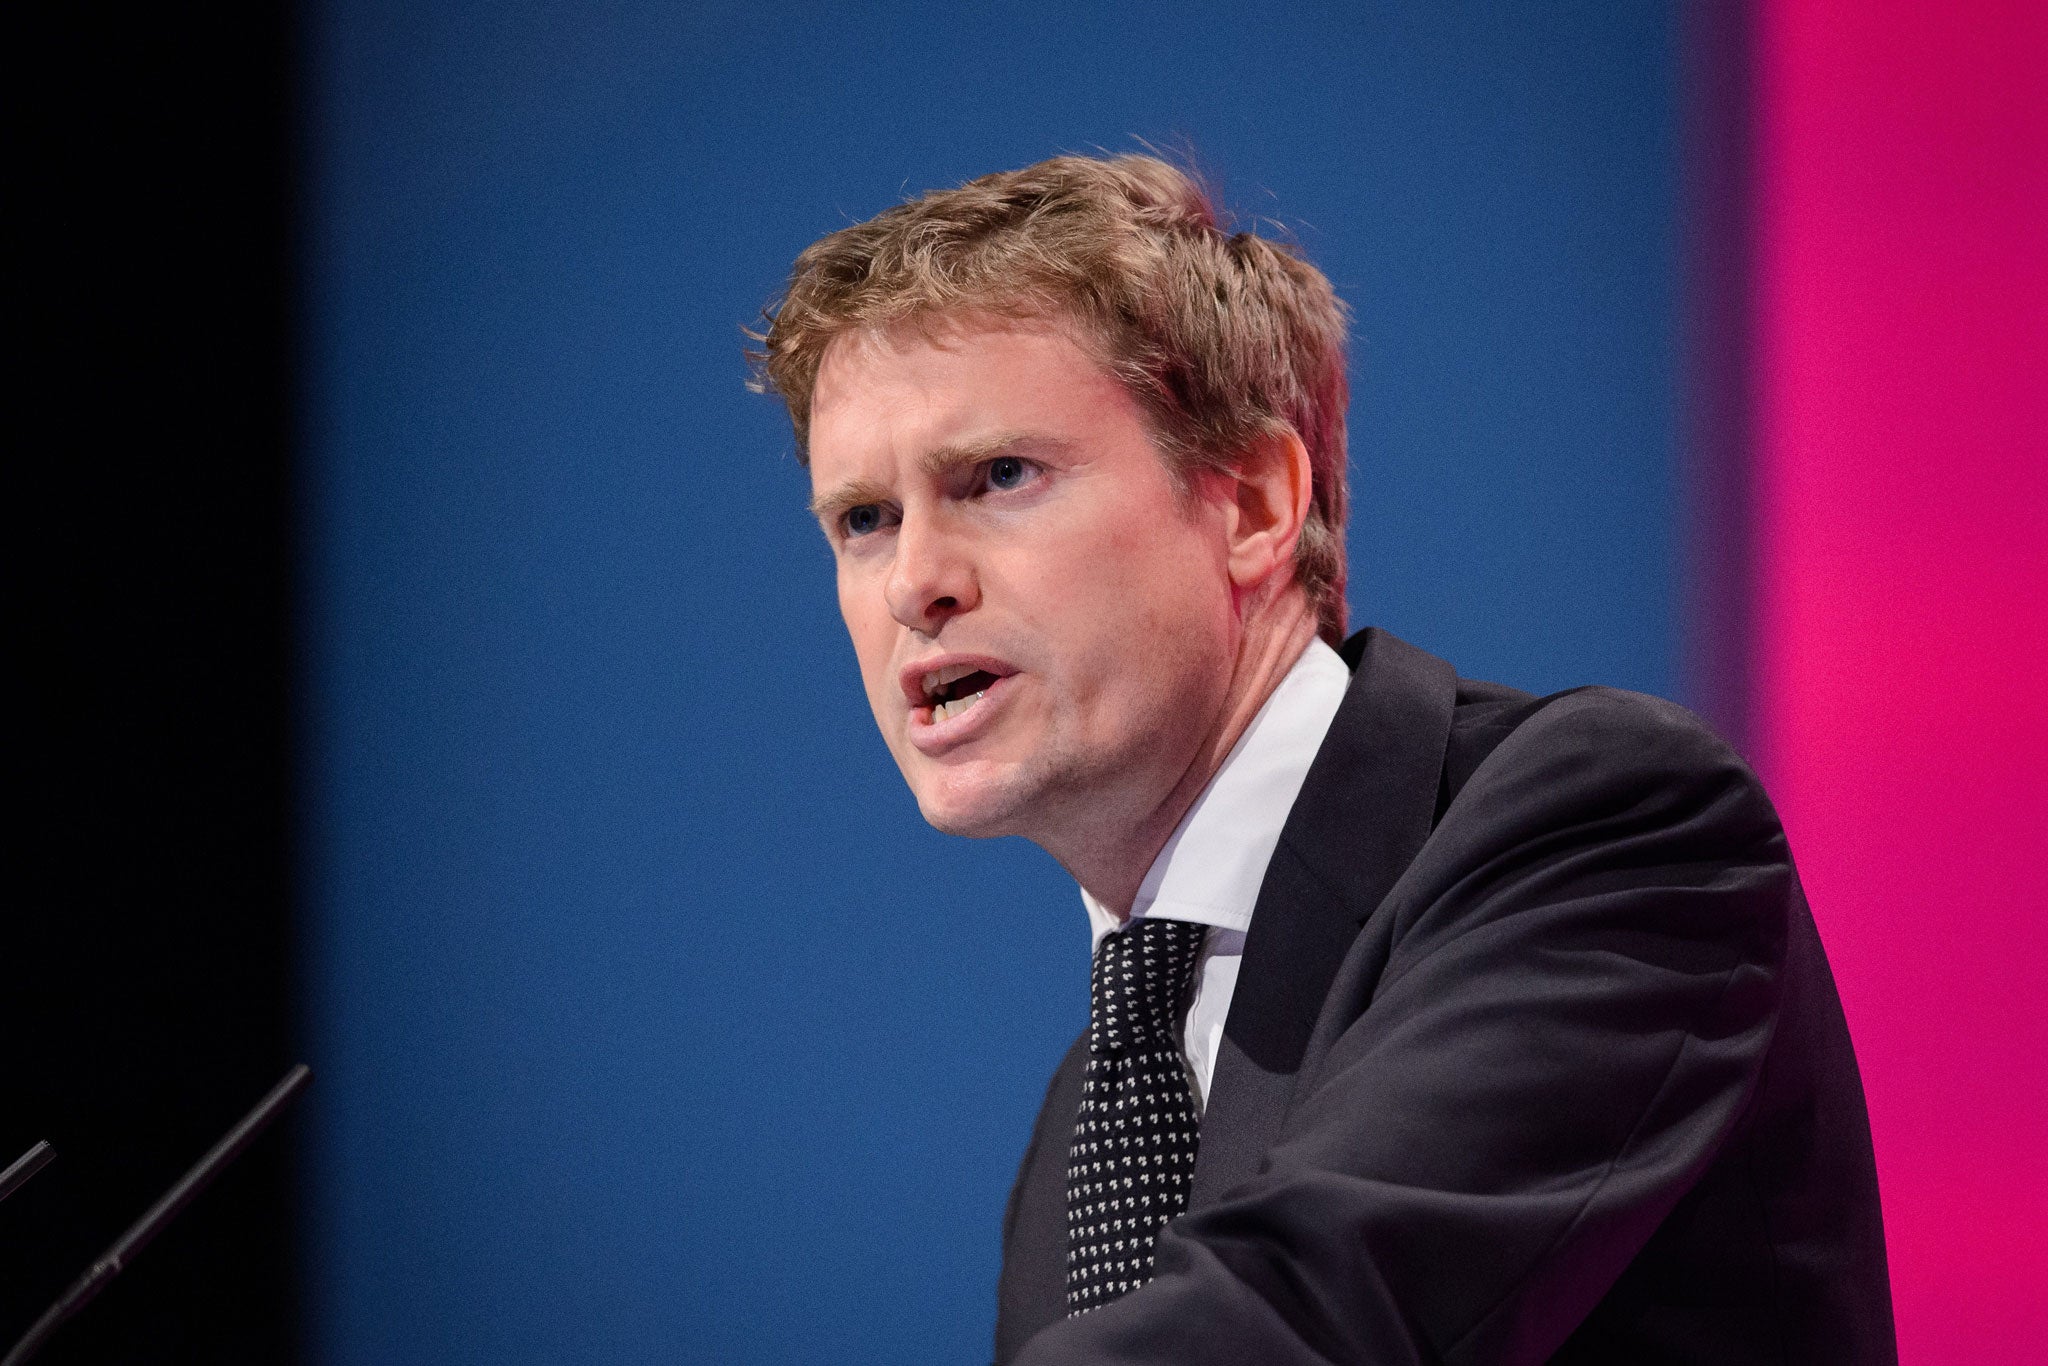 Only Labour's Tristram Hunt was due to make an appearance on behalf of the politicians at the Manchester conference